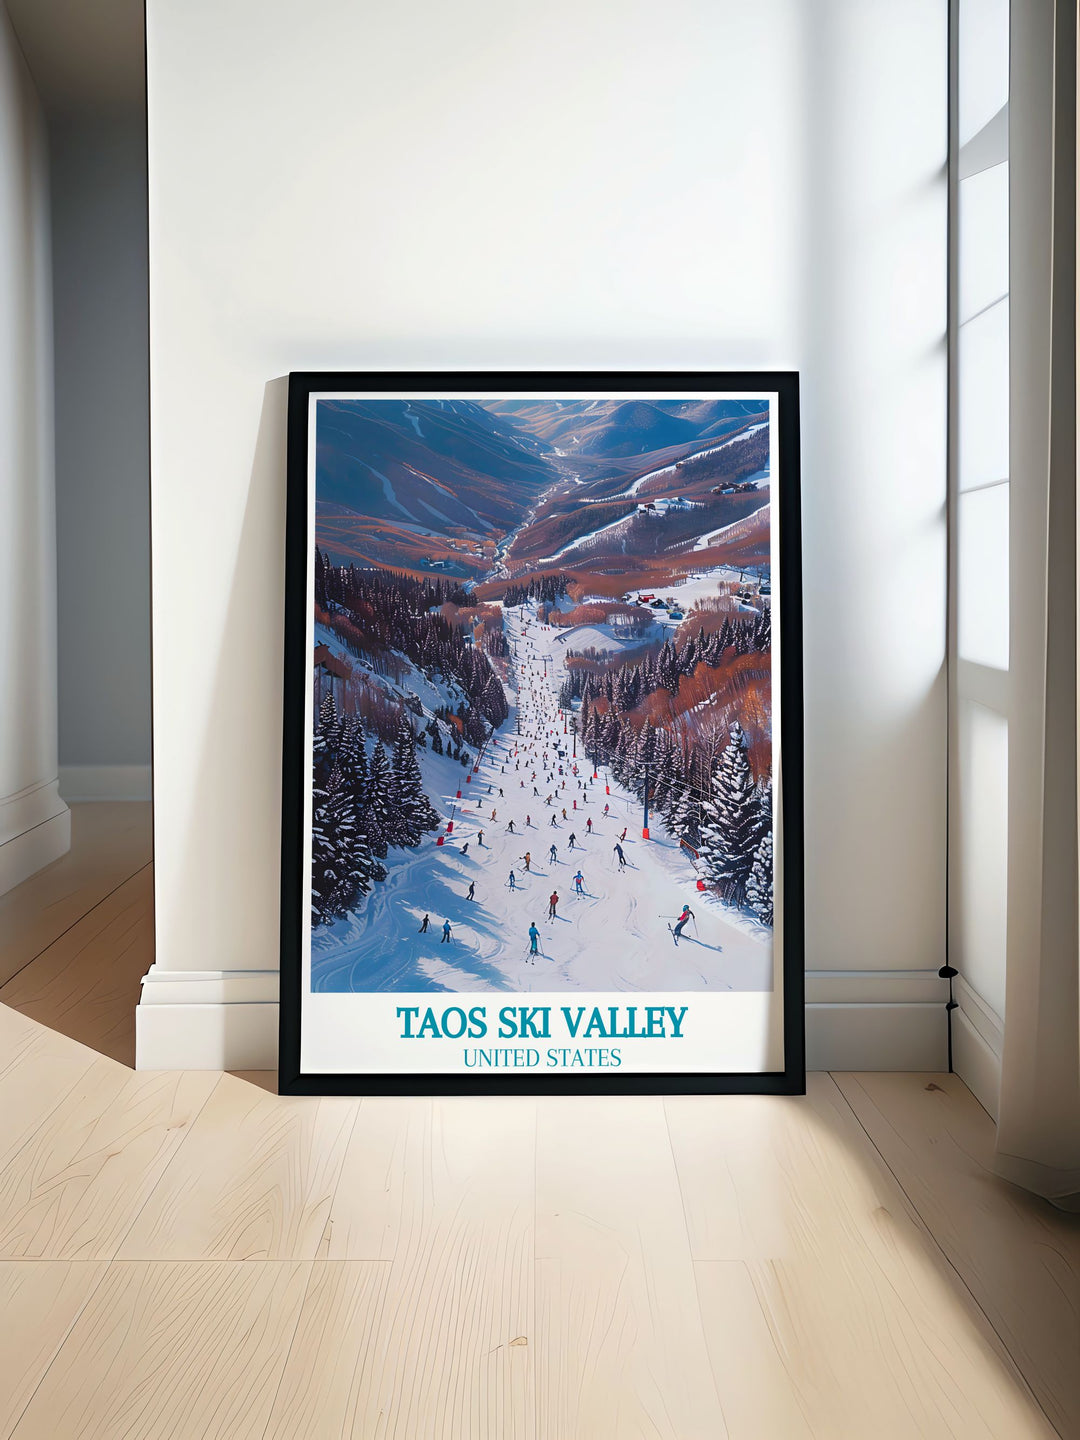 Embrace the winter wonderland of Taos with this travel poster, depicting the ski resorts breathtaking views and exhilarating trails.